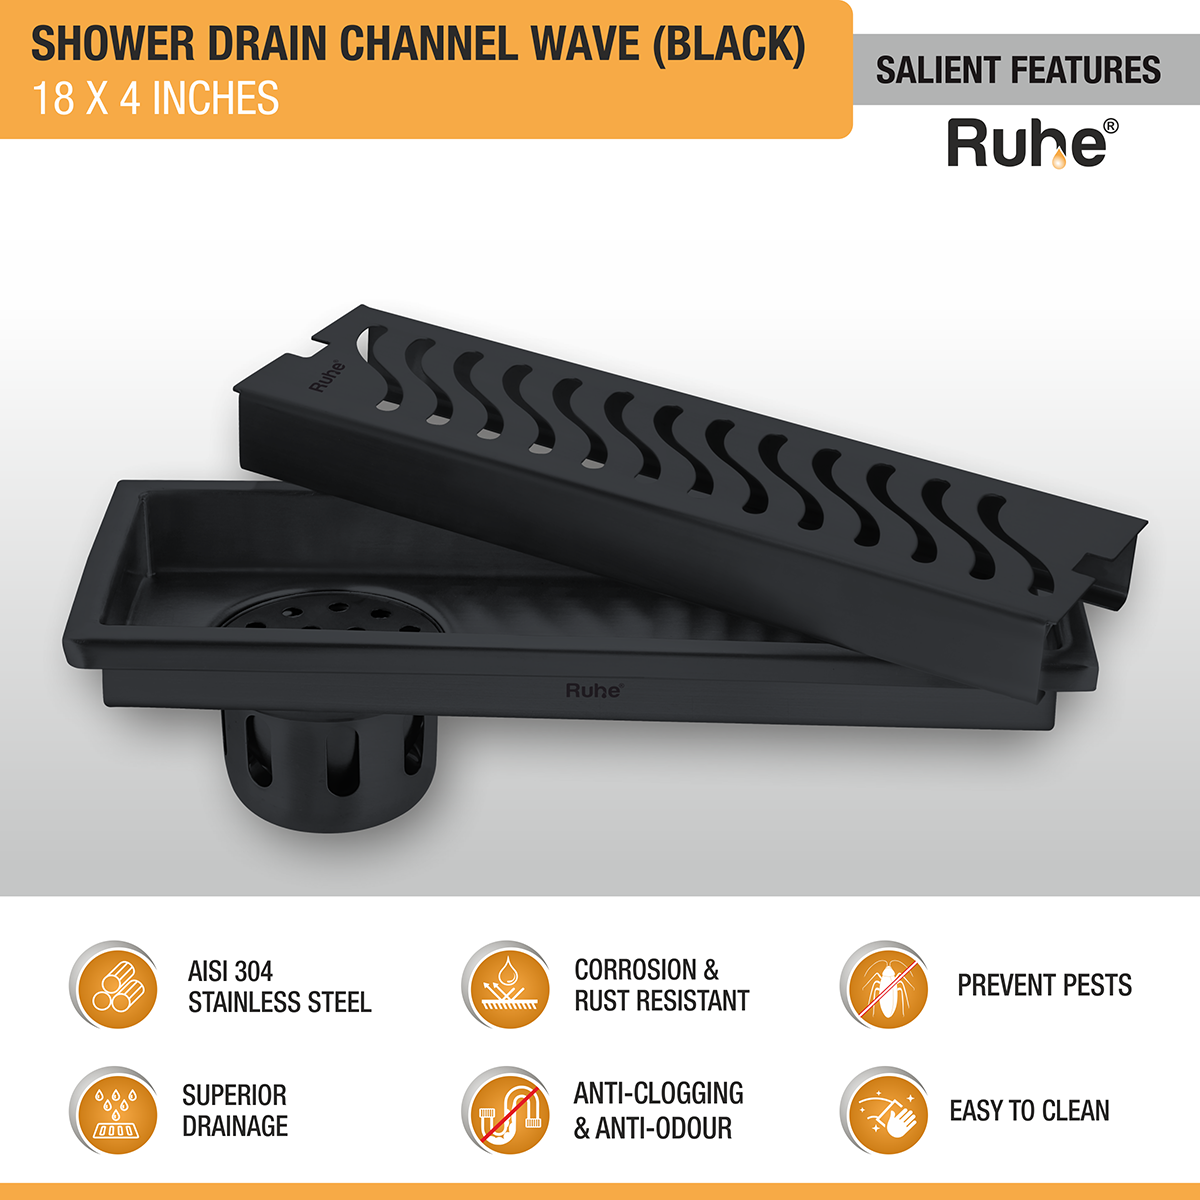 Wave Shower Drain Channel (18 x 4 Inches) Black PVD Coated features and benefits